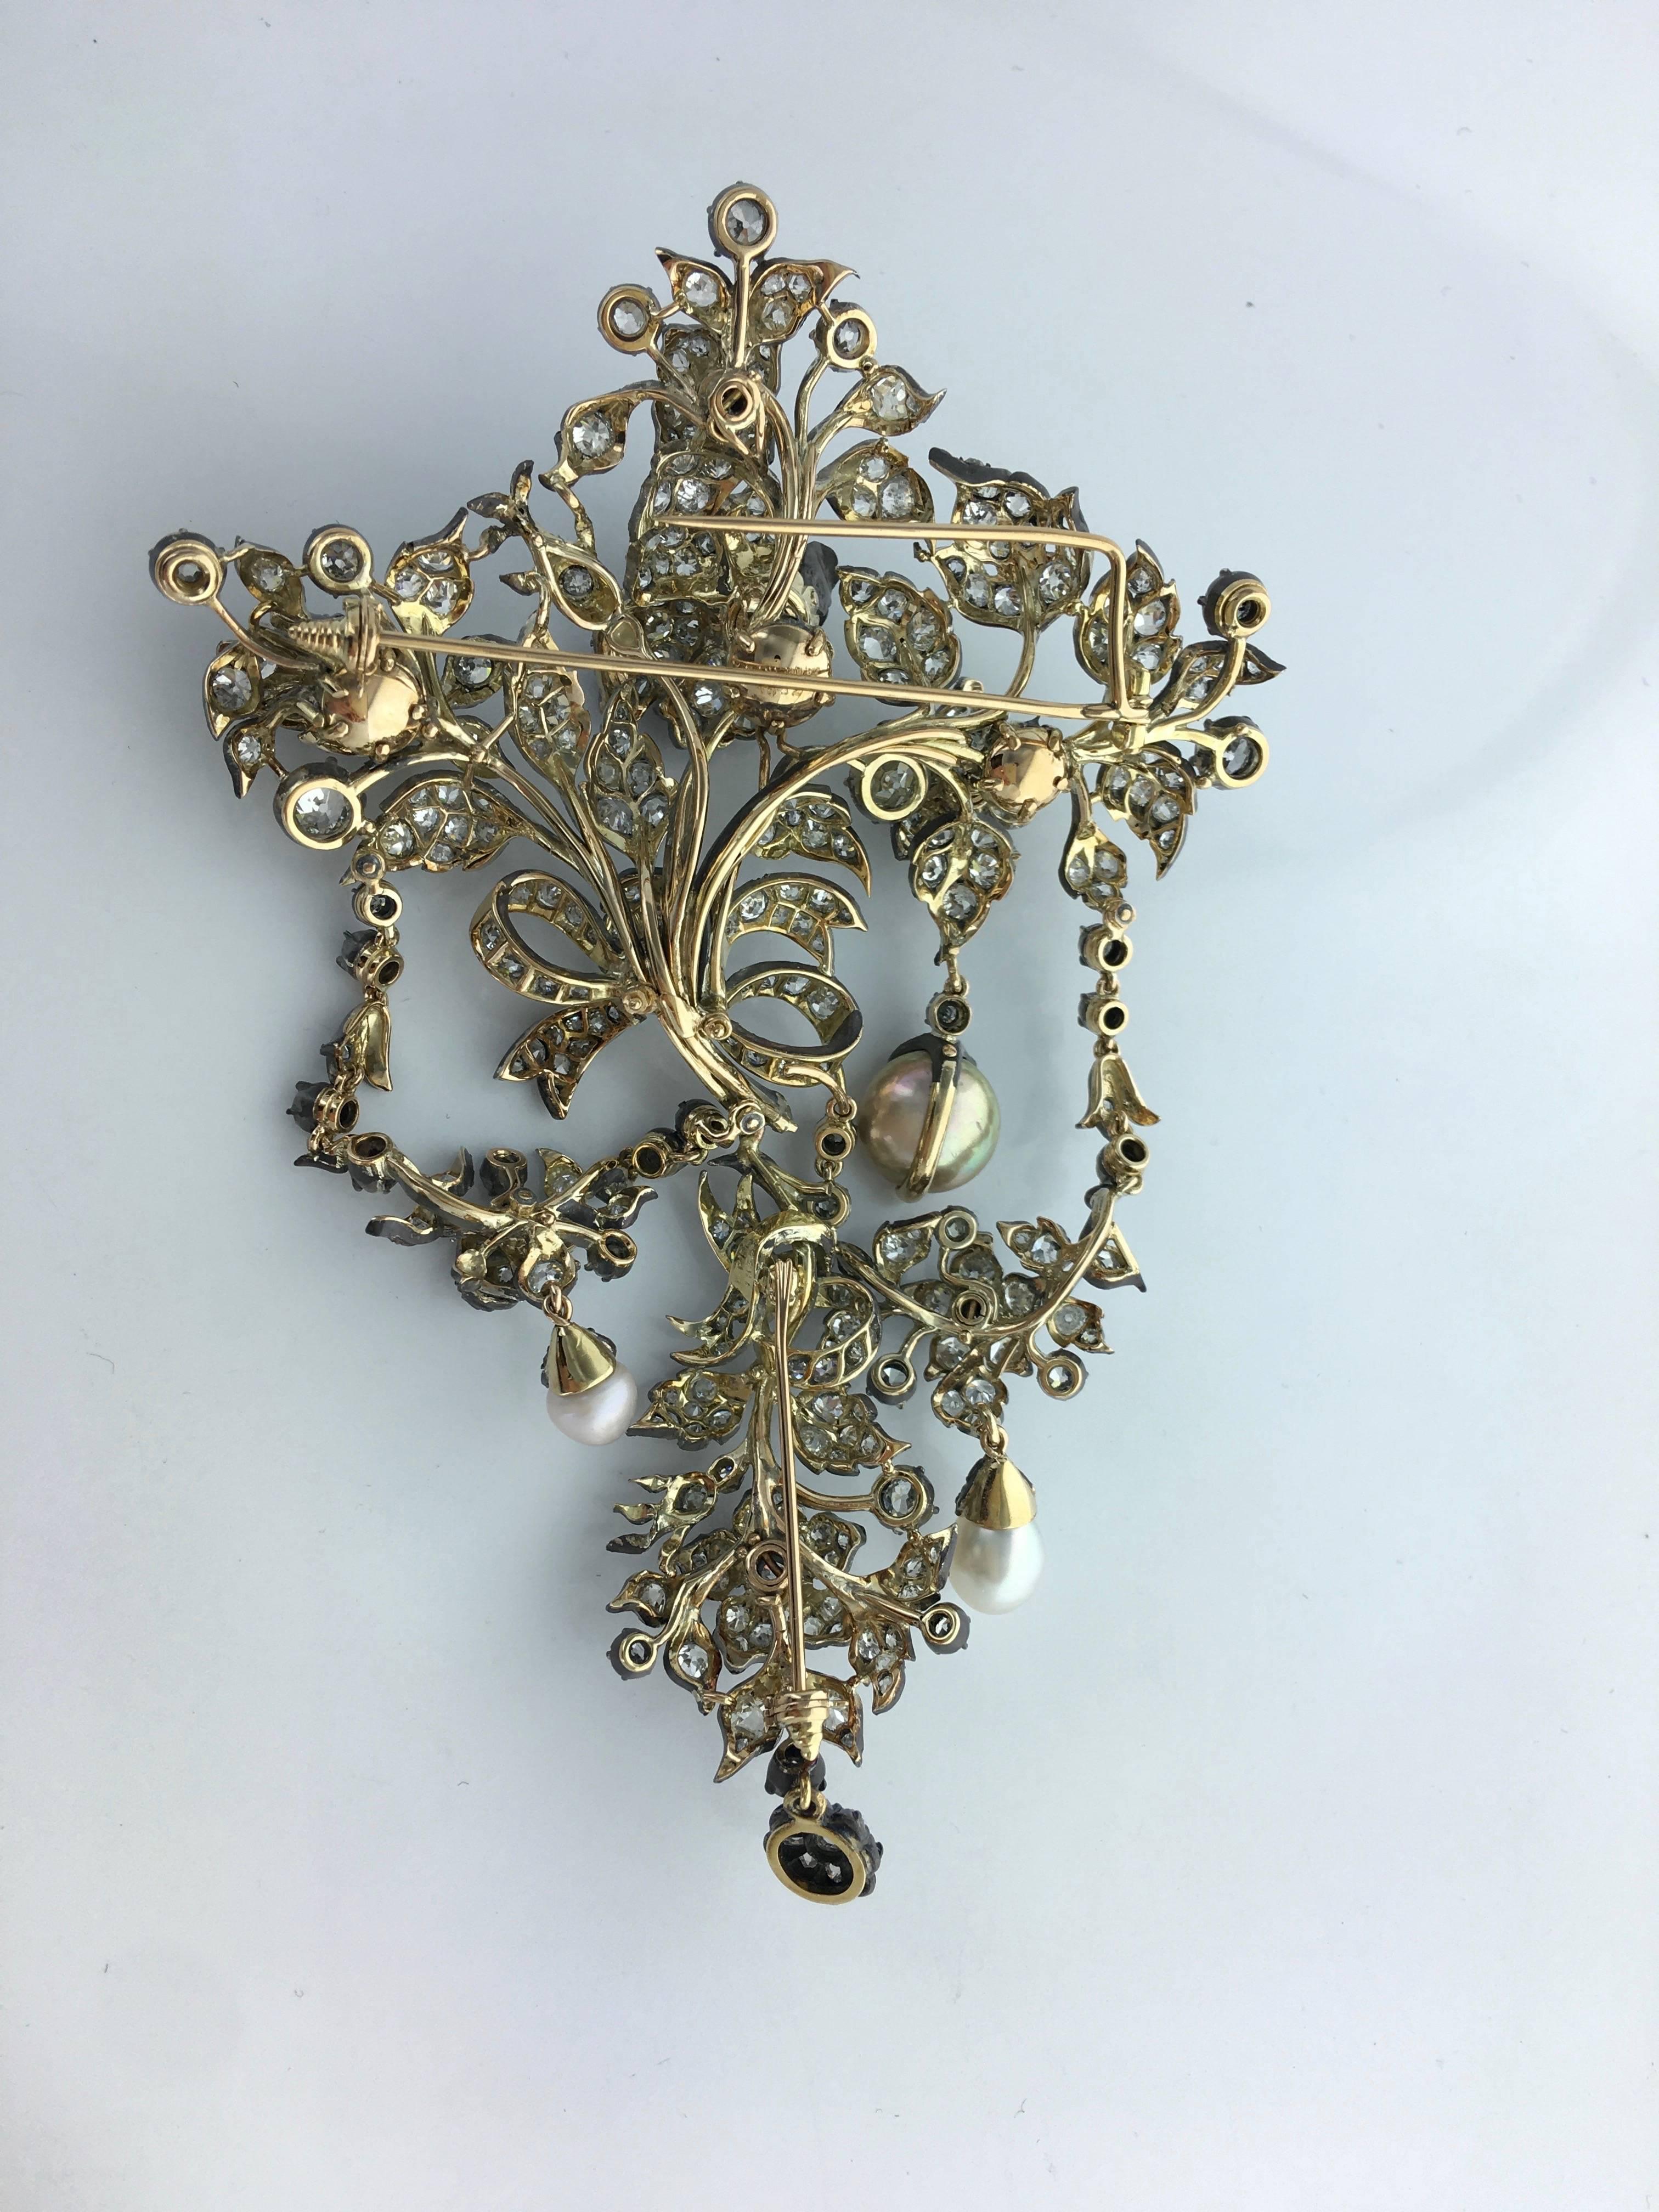 Unique and Awesome En Tremblant Stomacher Brooch.
Old-mine cut Diamond and Natural Pearl (not tested) mounted on silver and gold.
The size of this Museum piece is significant. Fitted case.
Dated 1832 (engraved). 
Signed E. Pierret.

Total height: